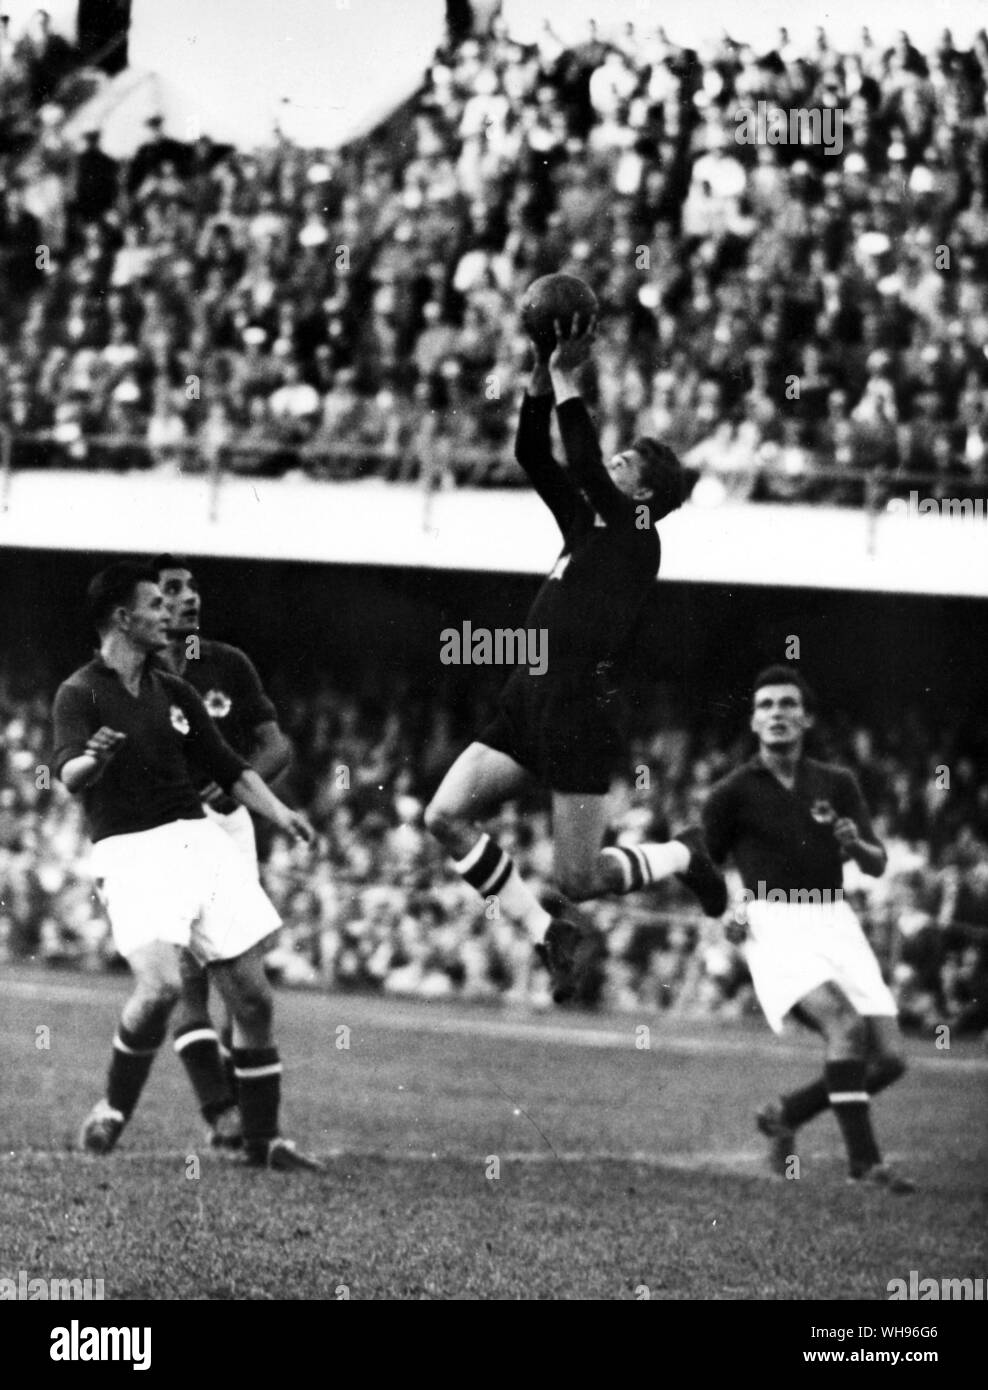 Finland,Helsinki/ Olympics,1952: The Olympic Football final. Hungary 2, Yugolsavia 0. The Hungarian goalkeeper, Grosits leaps high to make a save, with three Yugsolav strikers in close attendance.. Stock Photo